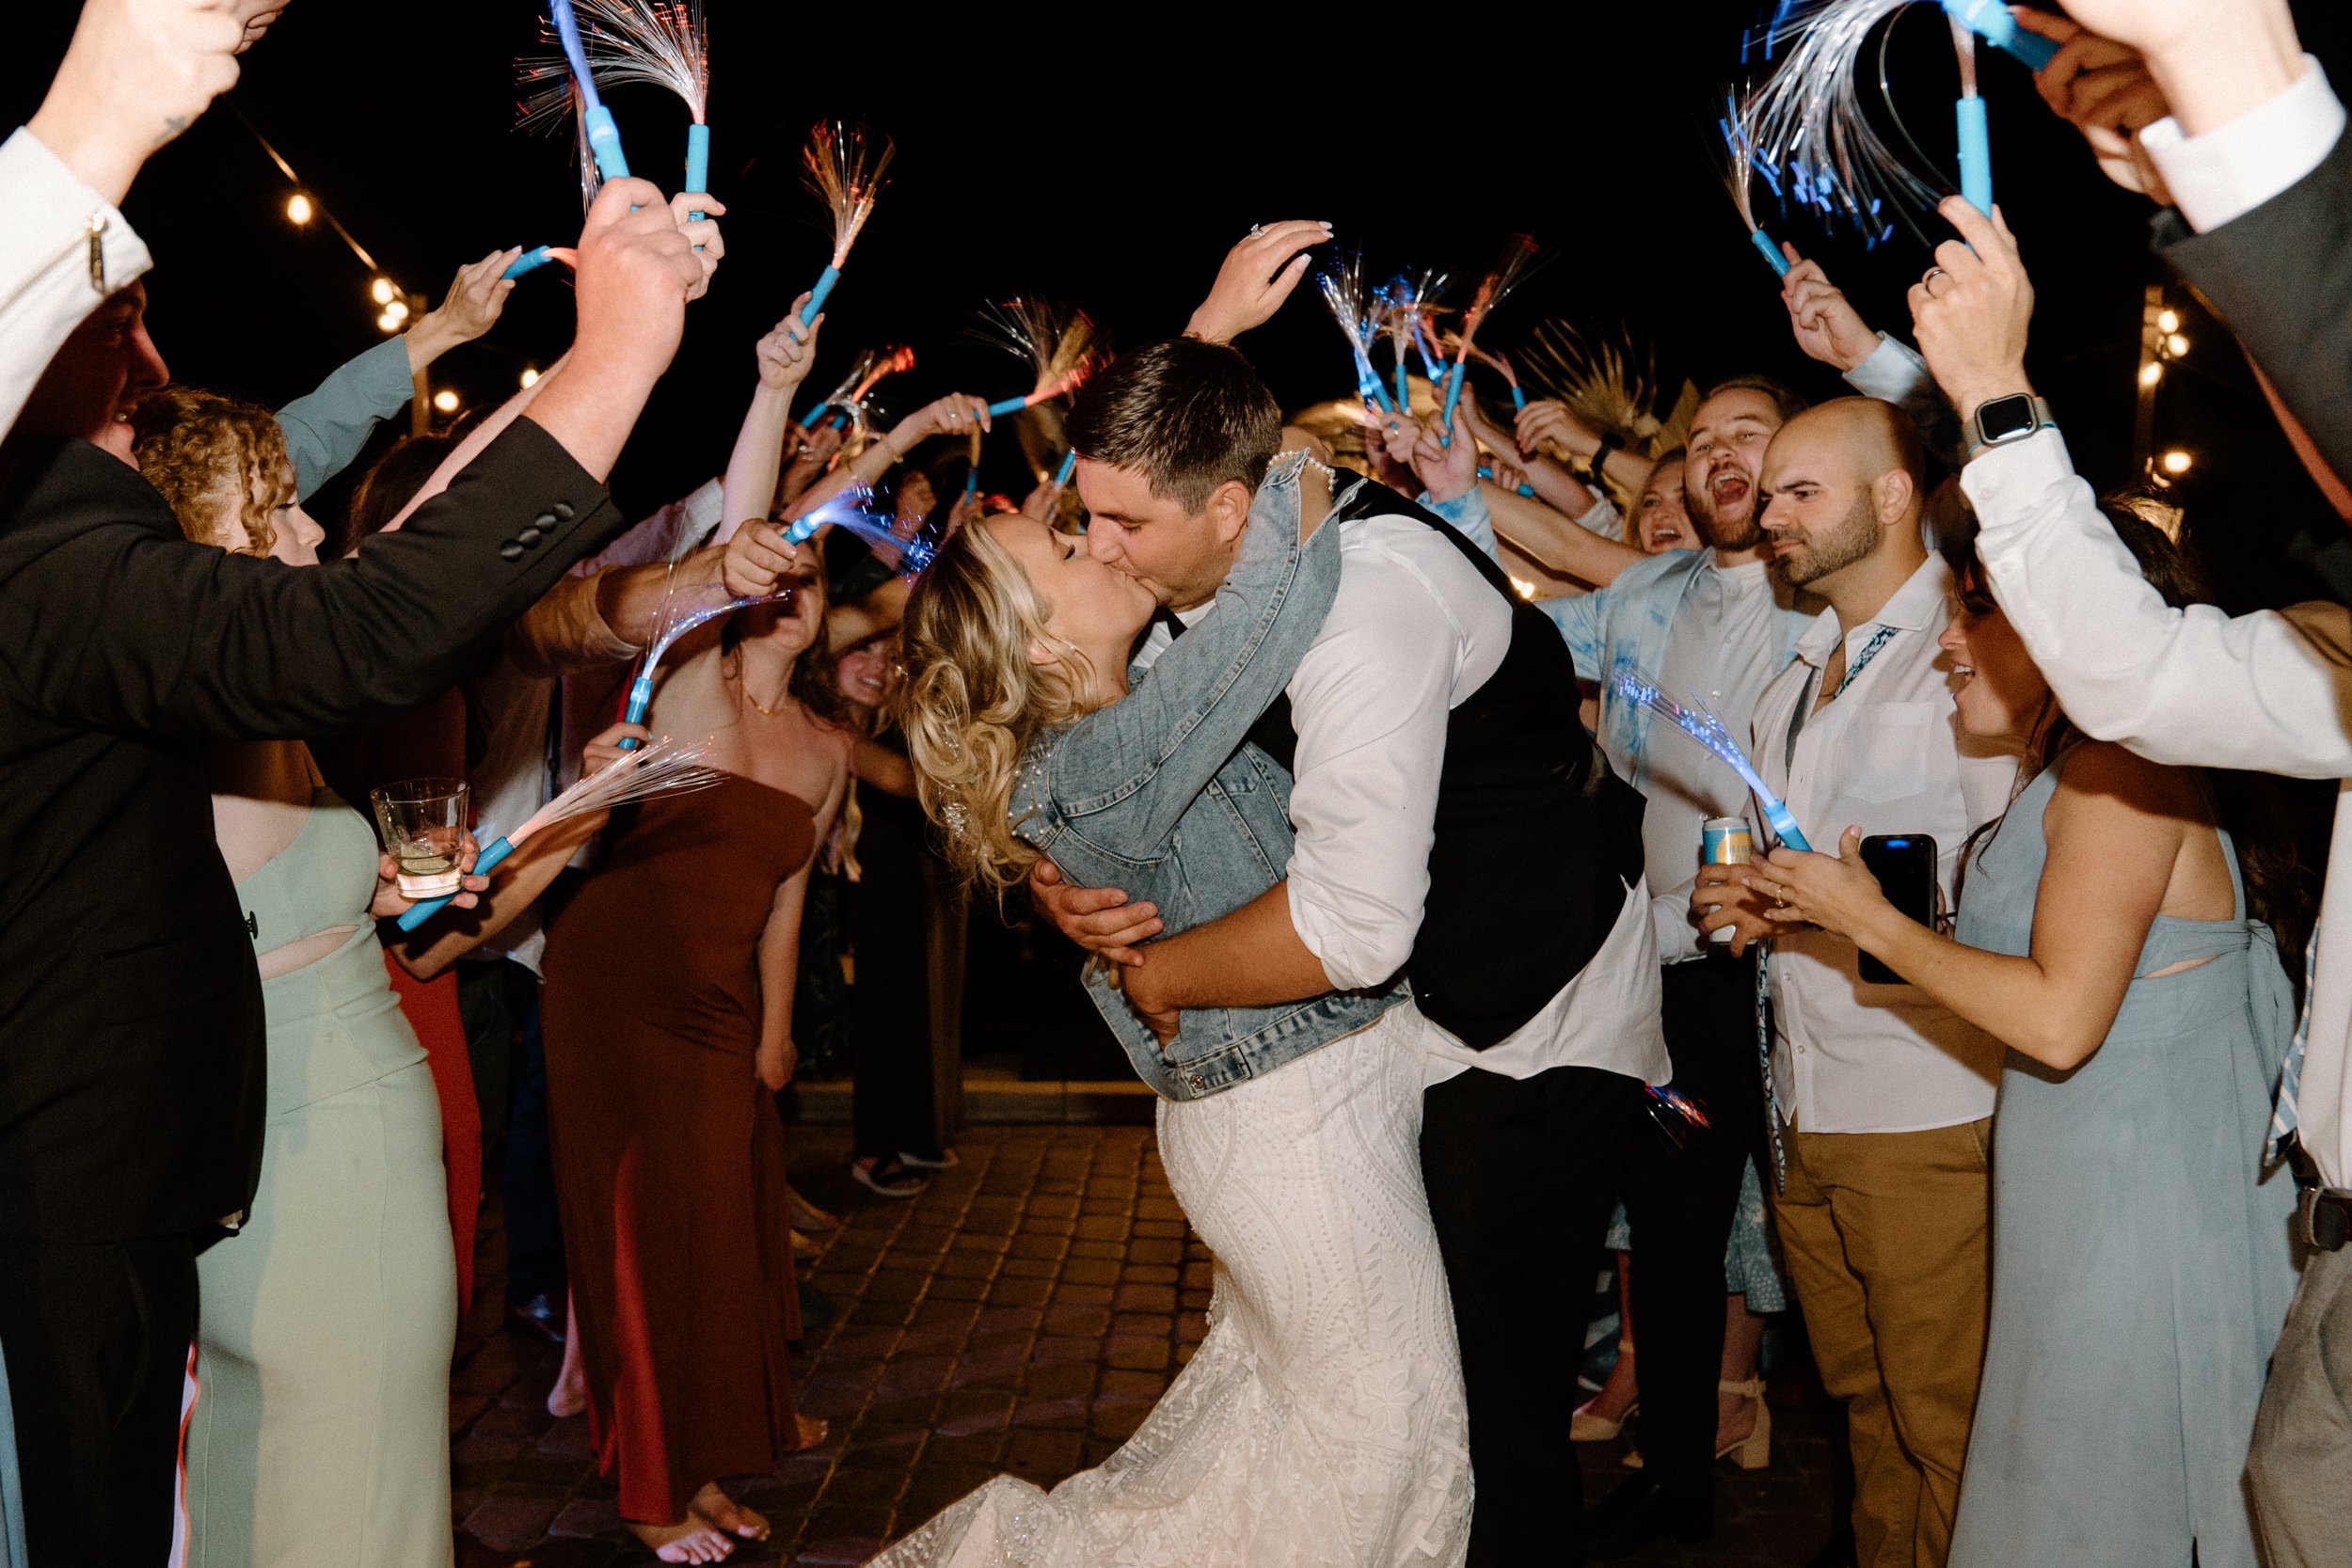 The bride and groom kiss in the glow stick tunnel as they exit